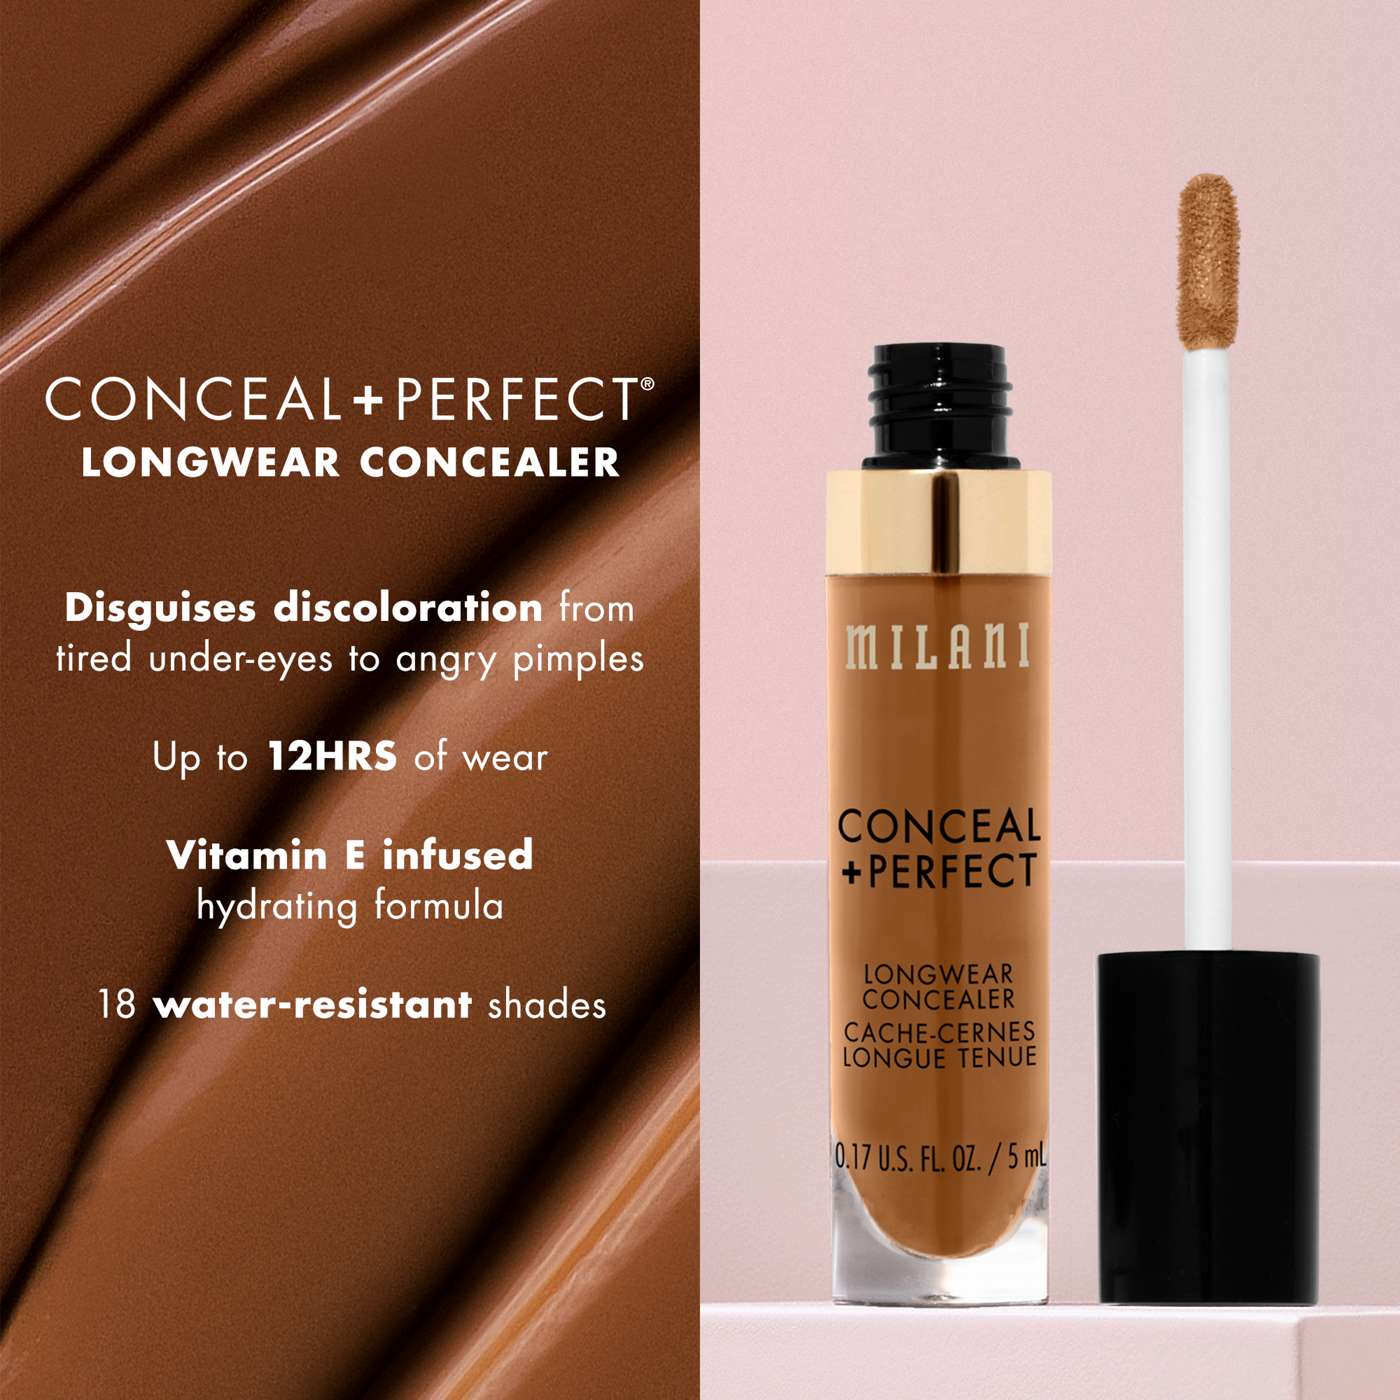 Milani Conceal +Perfect Longwear Concealer - Nude Ivory; image 9 of 10